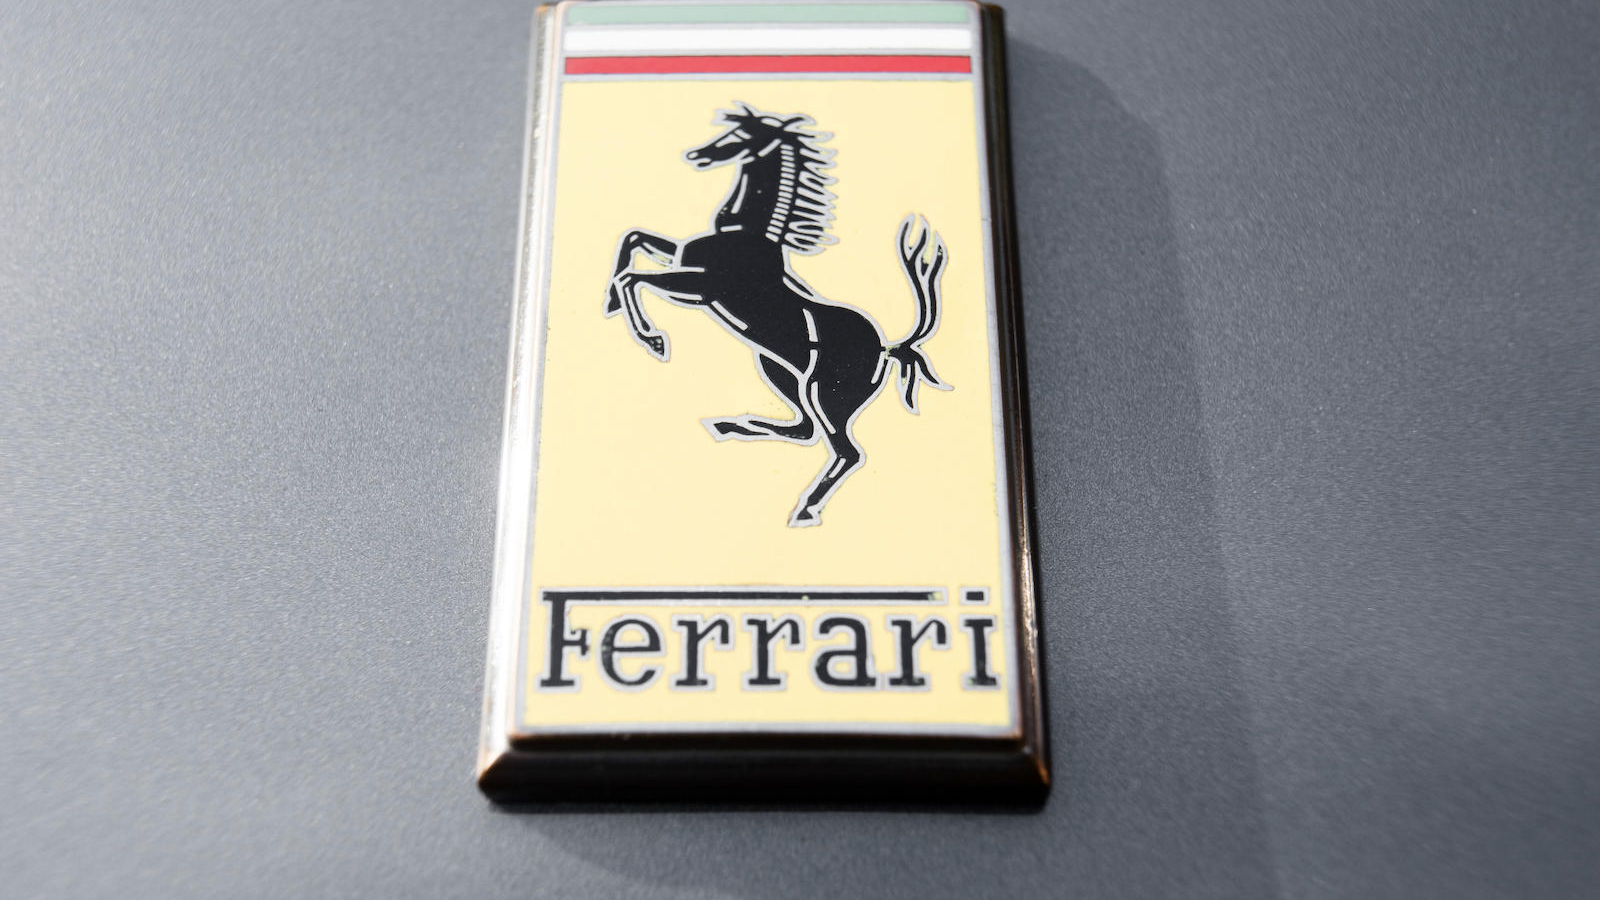 This pristine Ferrari is too good to be valued